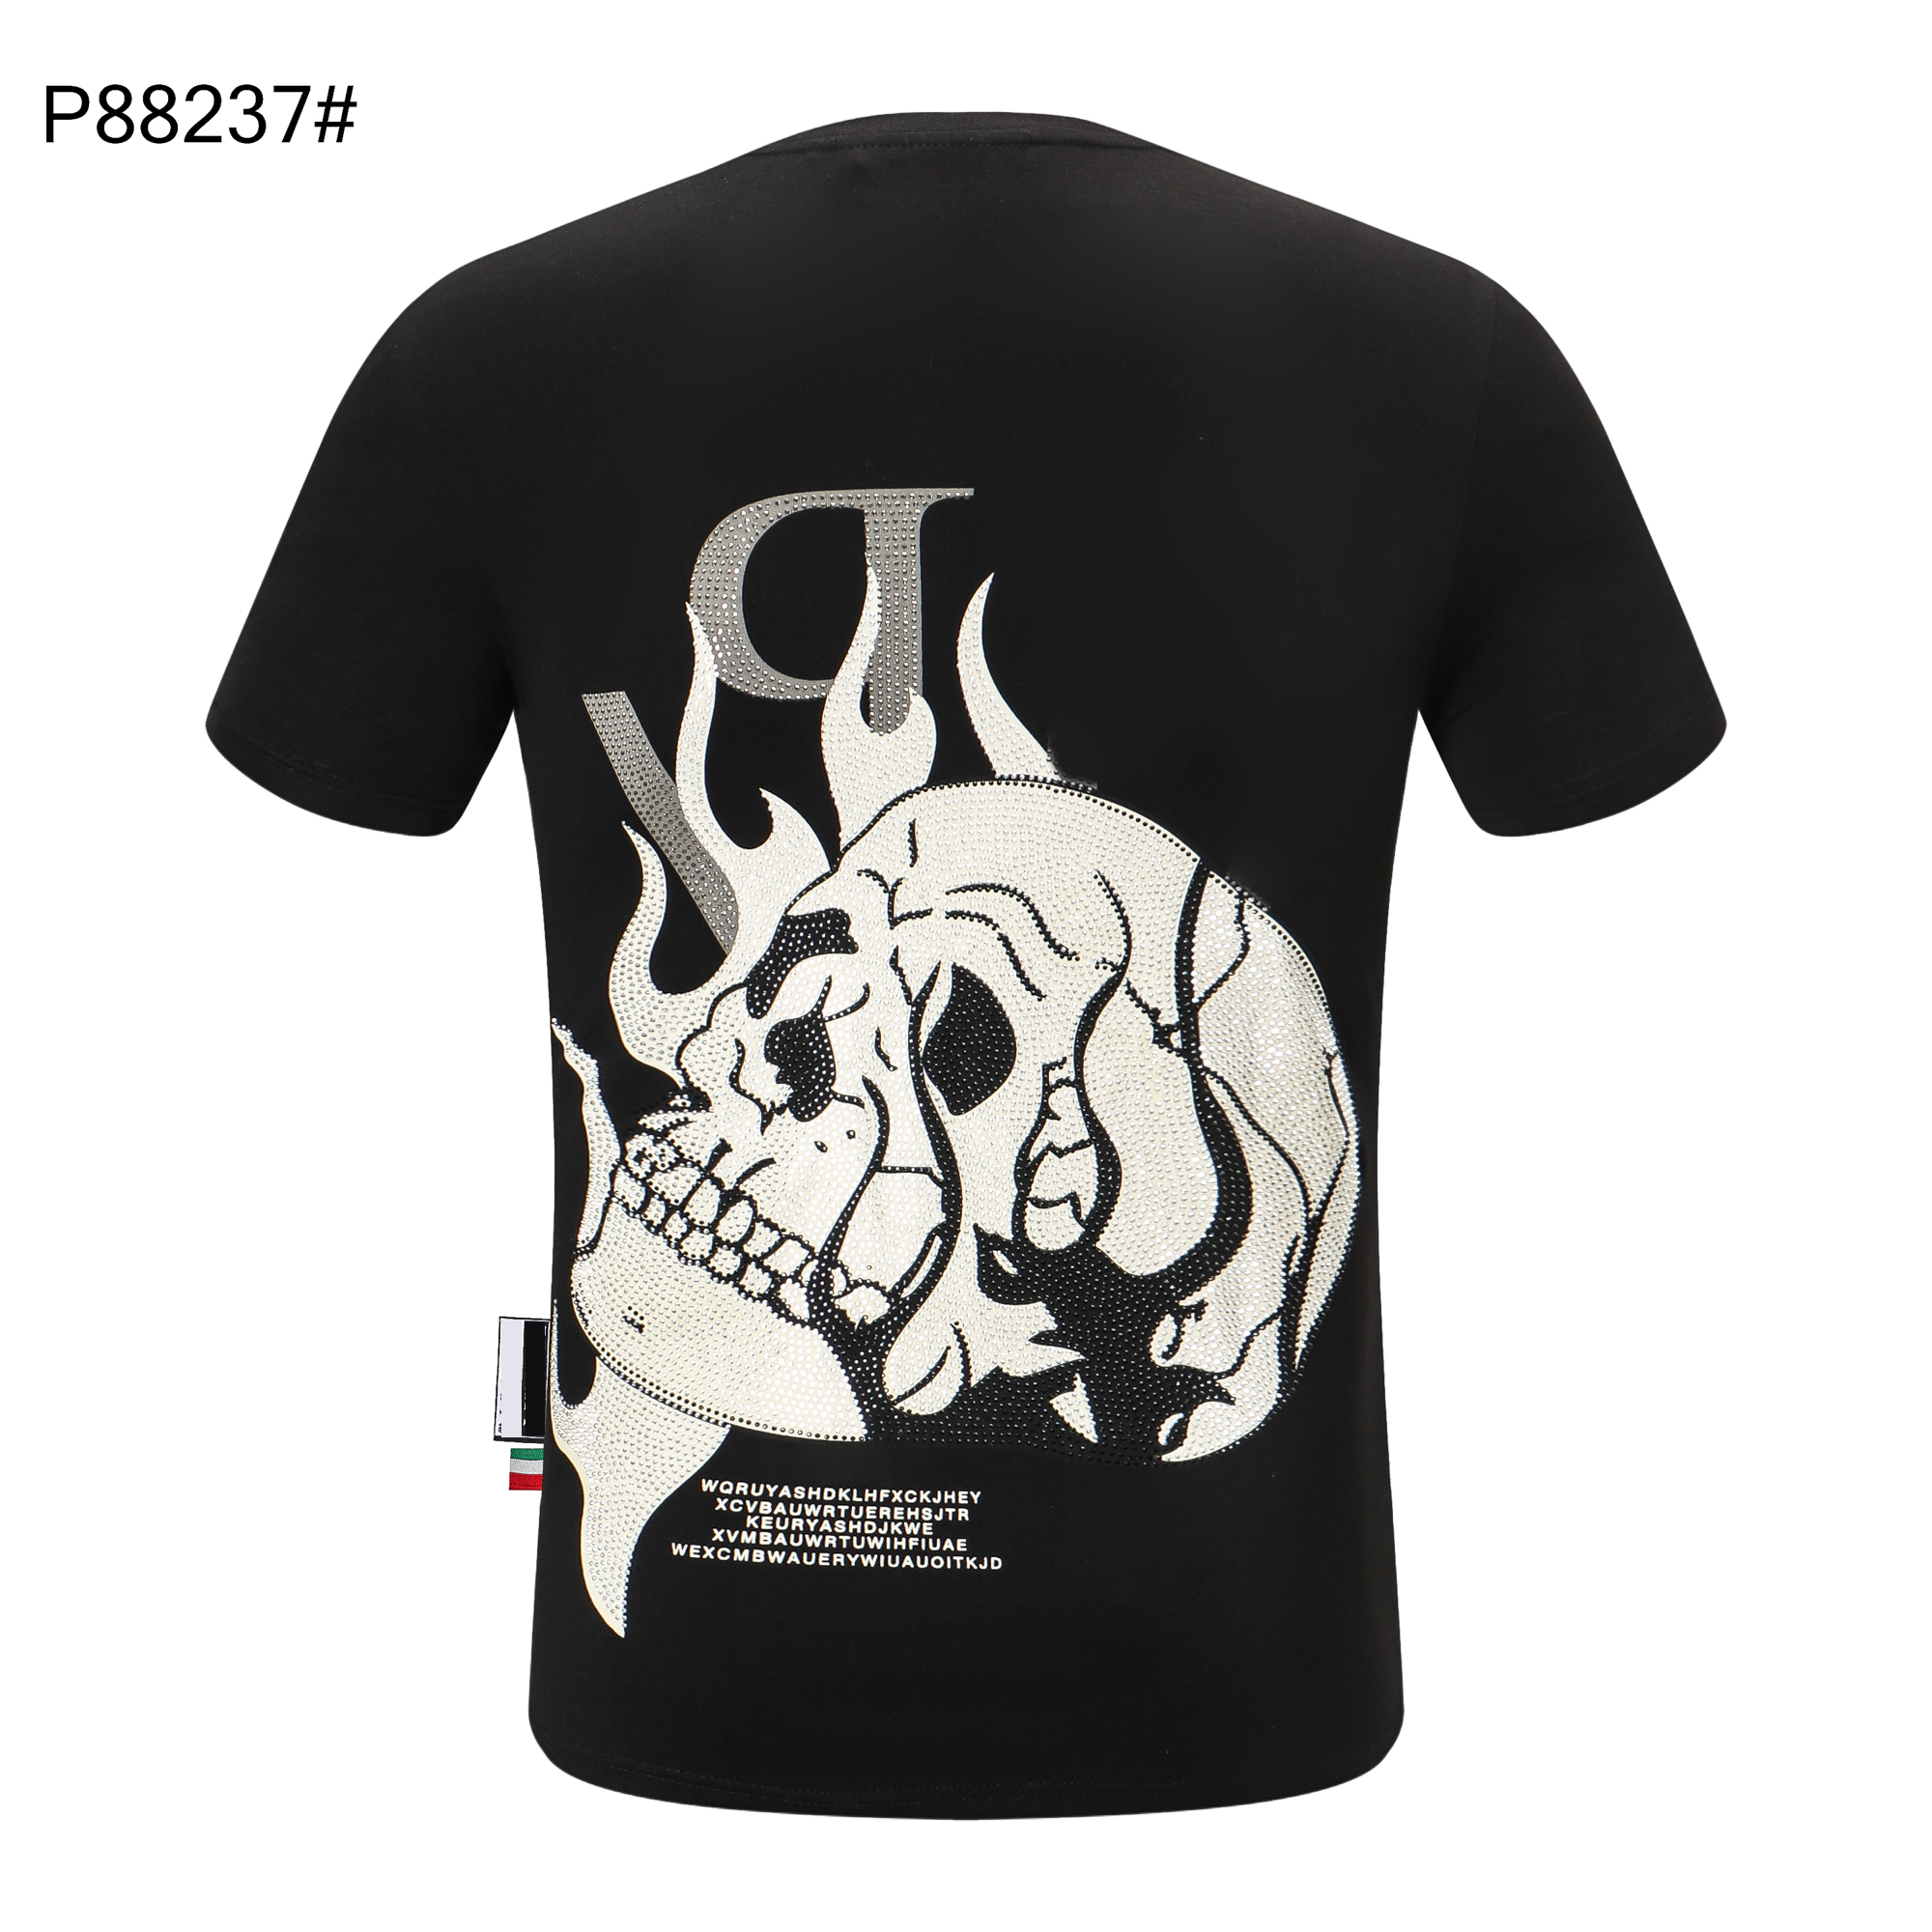 

Men SKULL T shirt PP Geometric Pattern Summer Casual Tee Fashion Ins Style Top Streetwear Loose High Quality Sport Hip-hop Mature Trendy T Shirts PHILLIP PLAIN 02, More styles 85454484